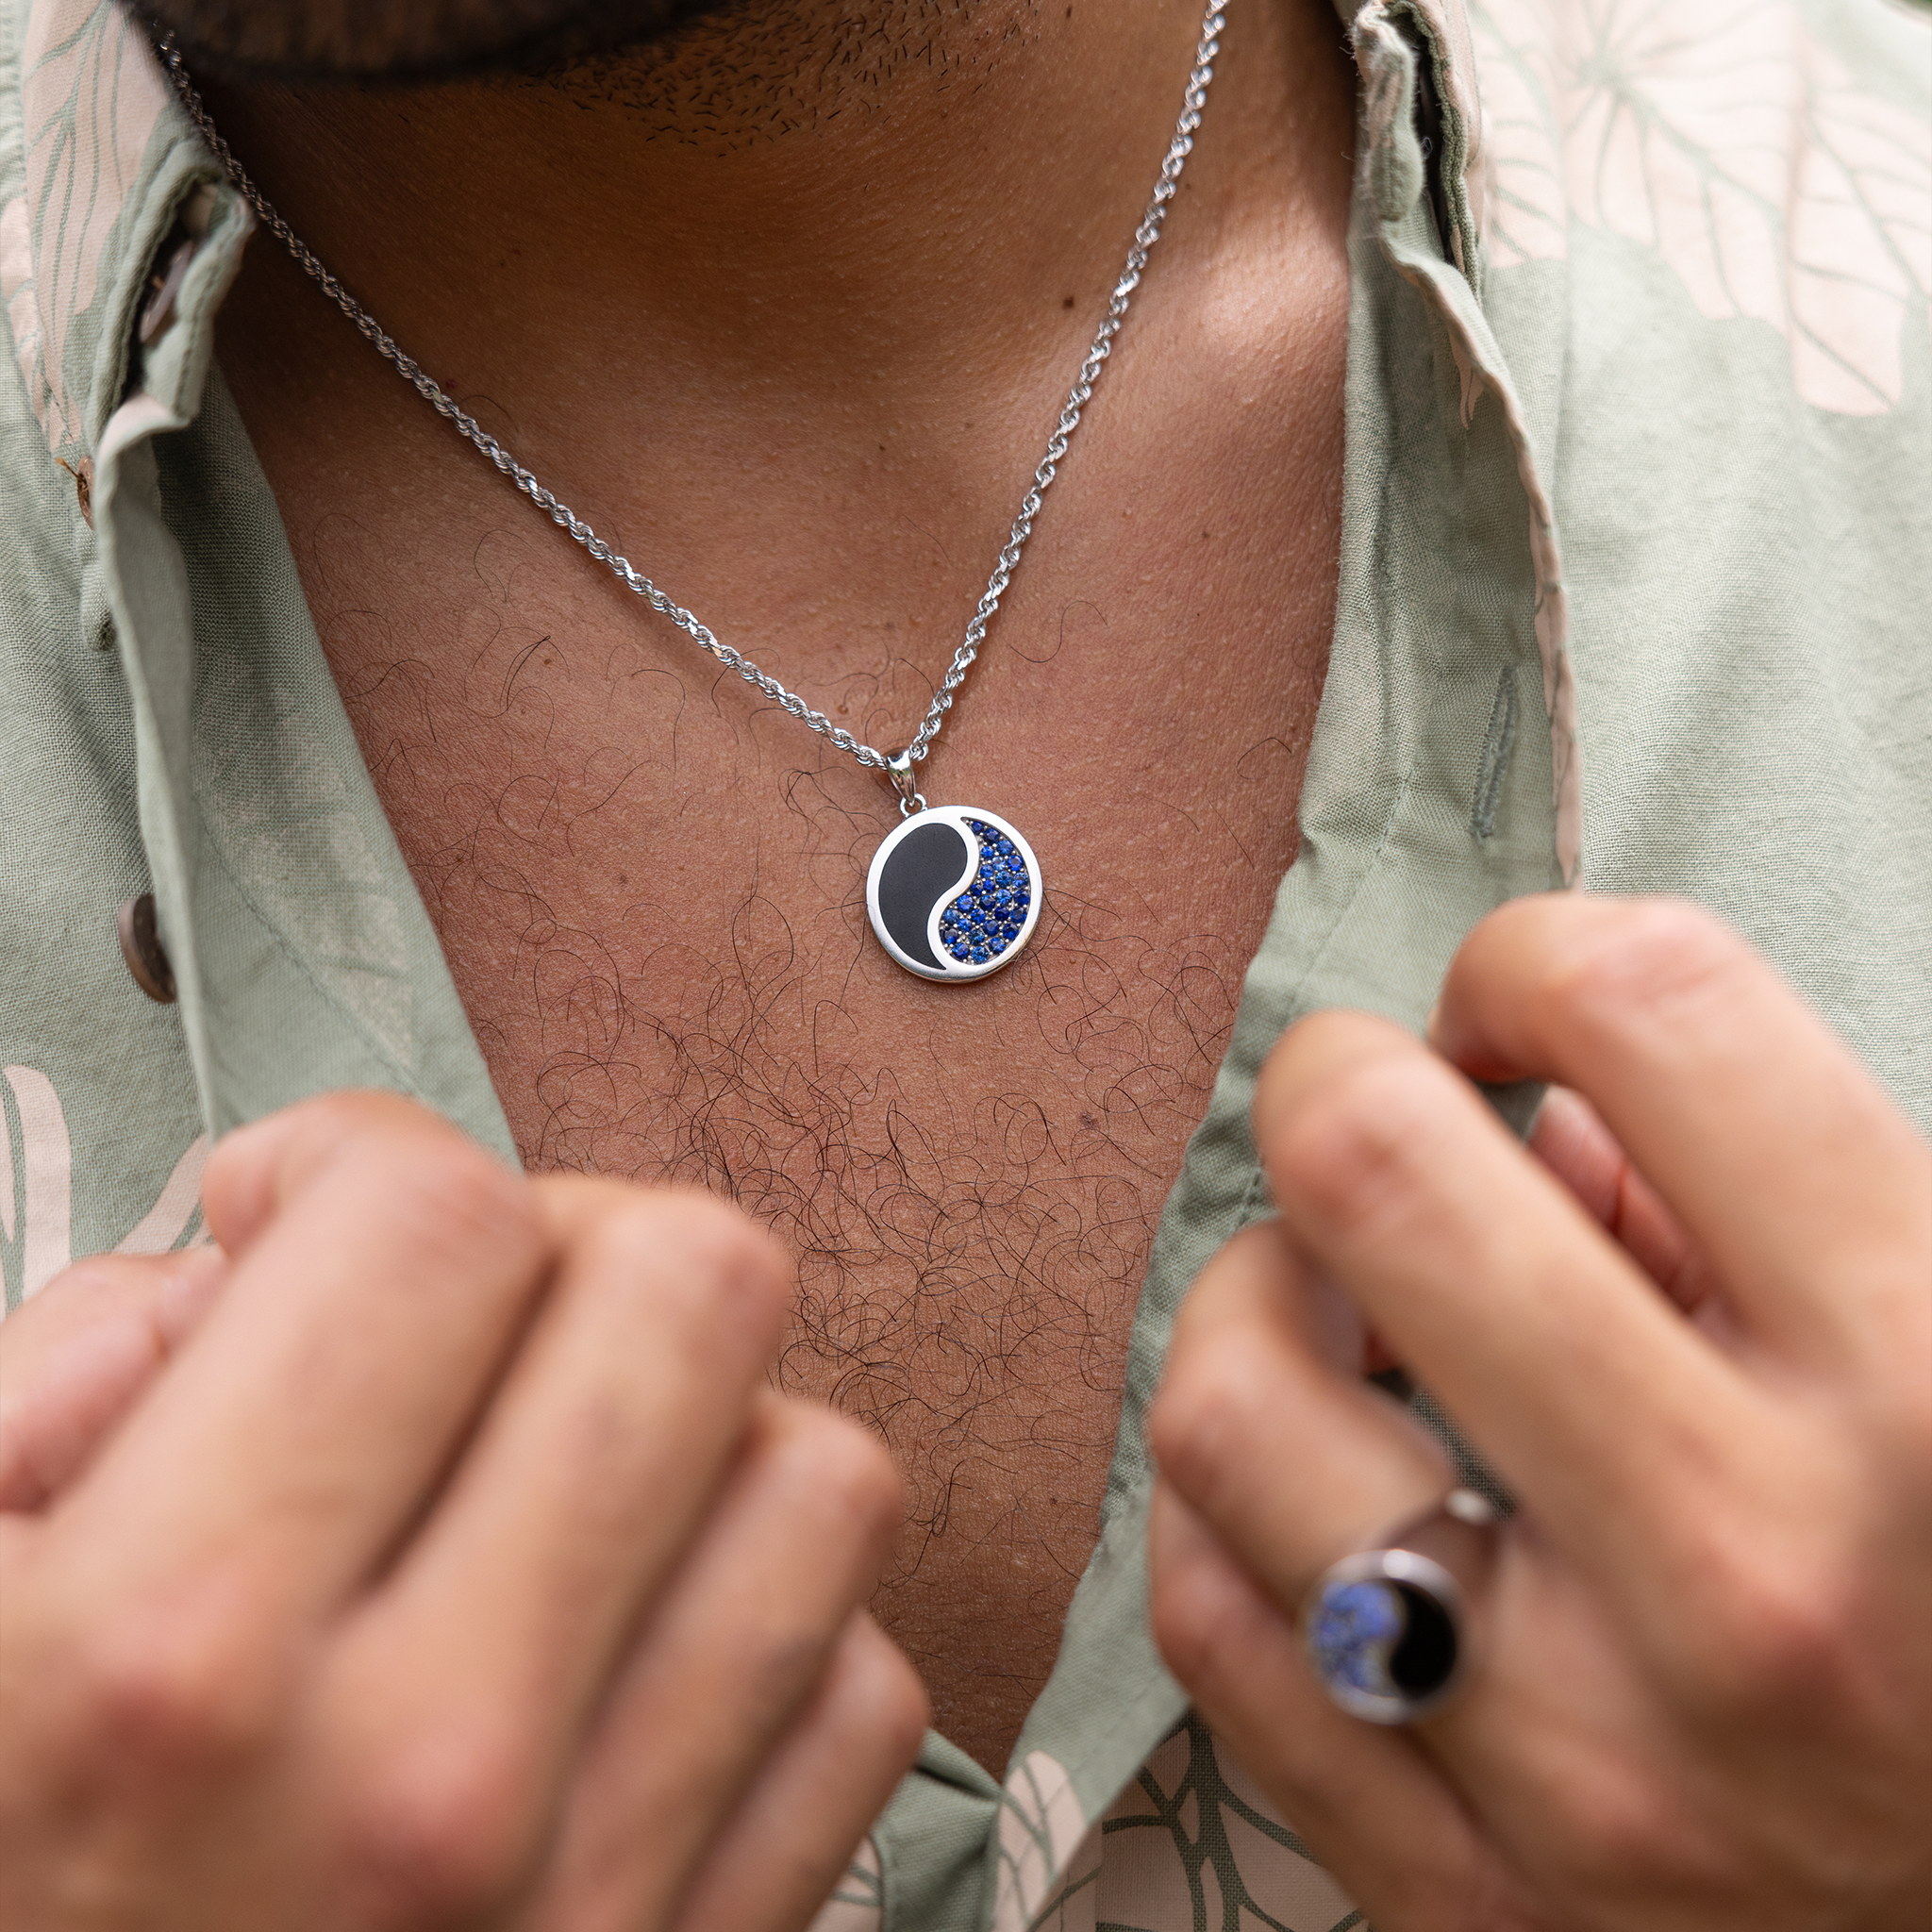 Yin Yang Black Coral Pendant in White Gold with Blue Sapphires - 22mm